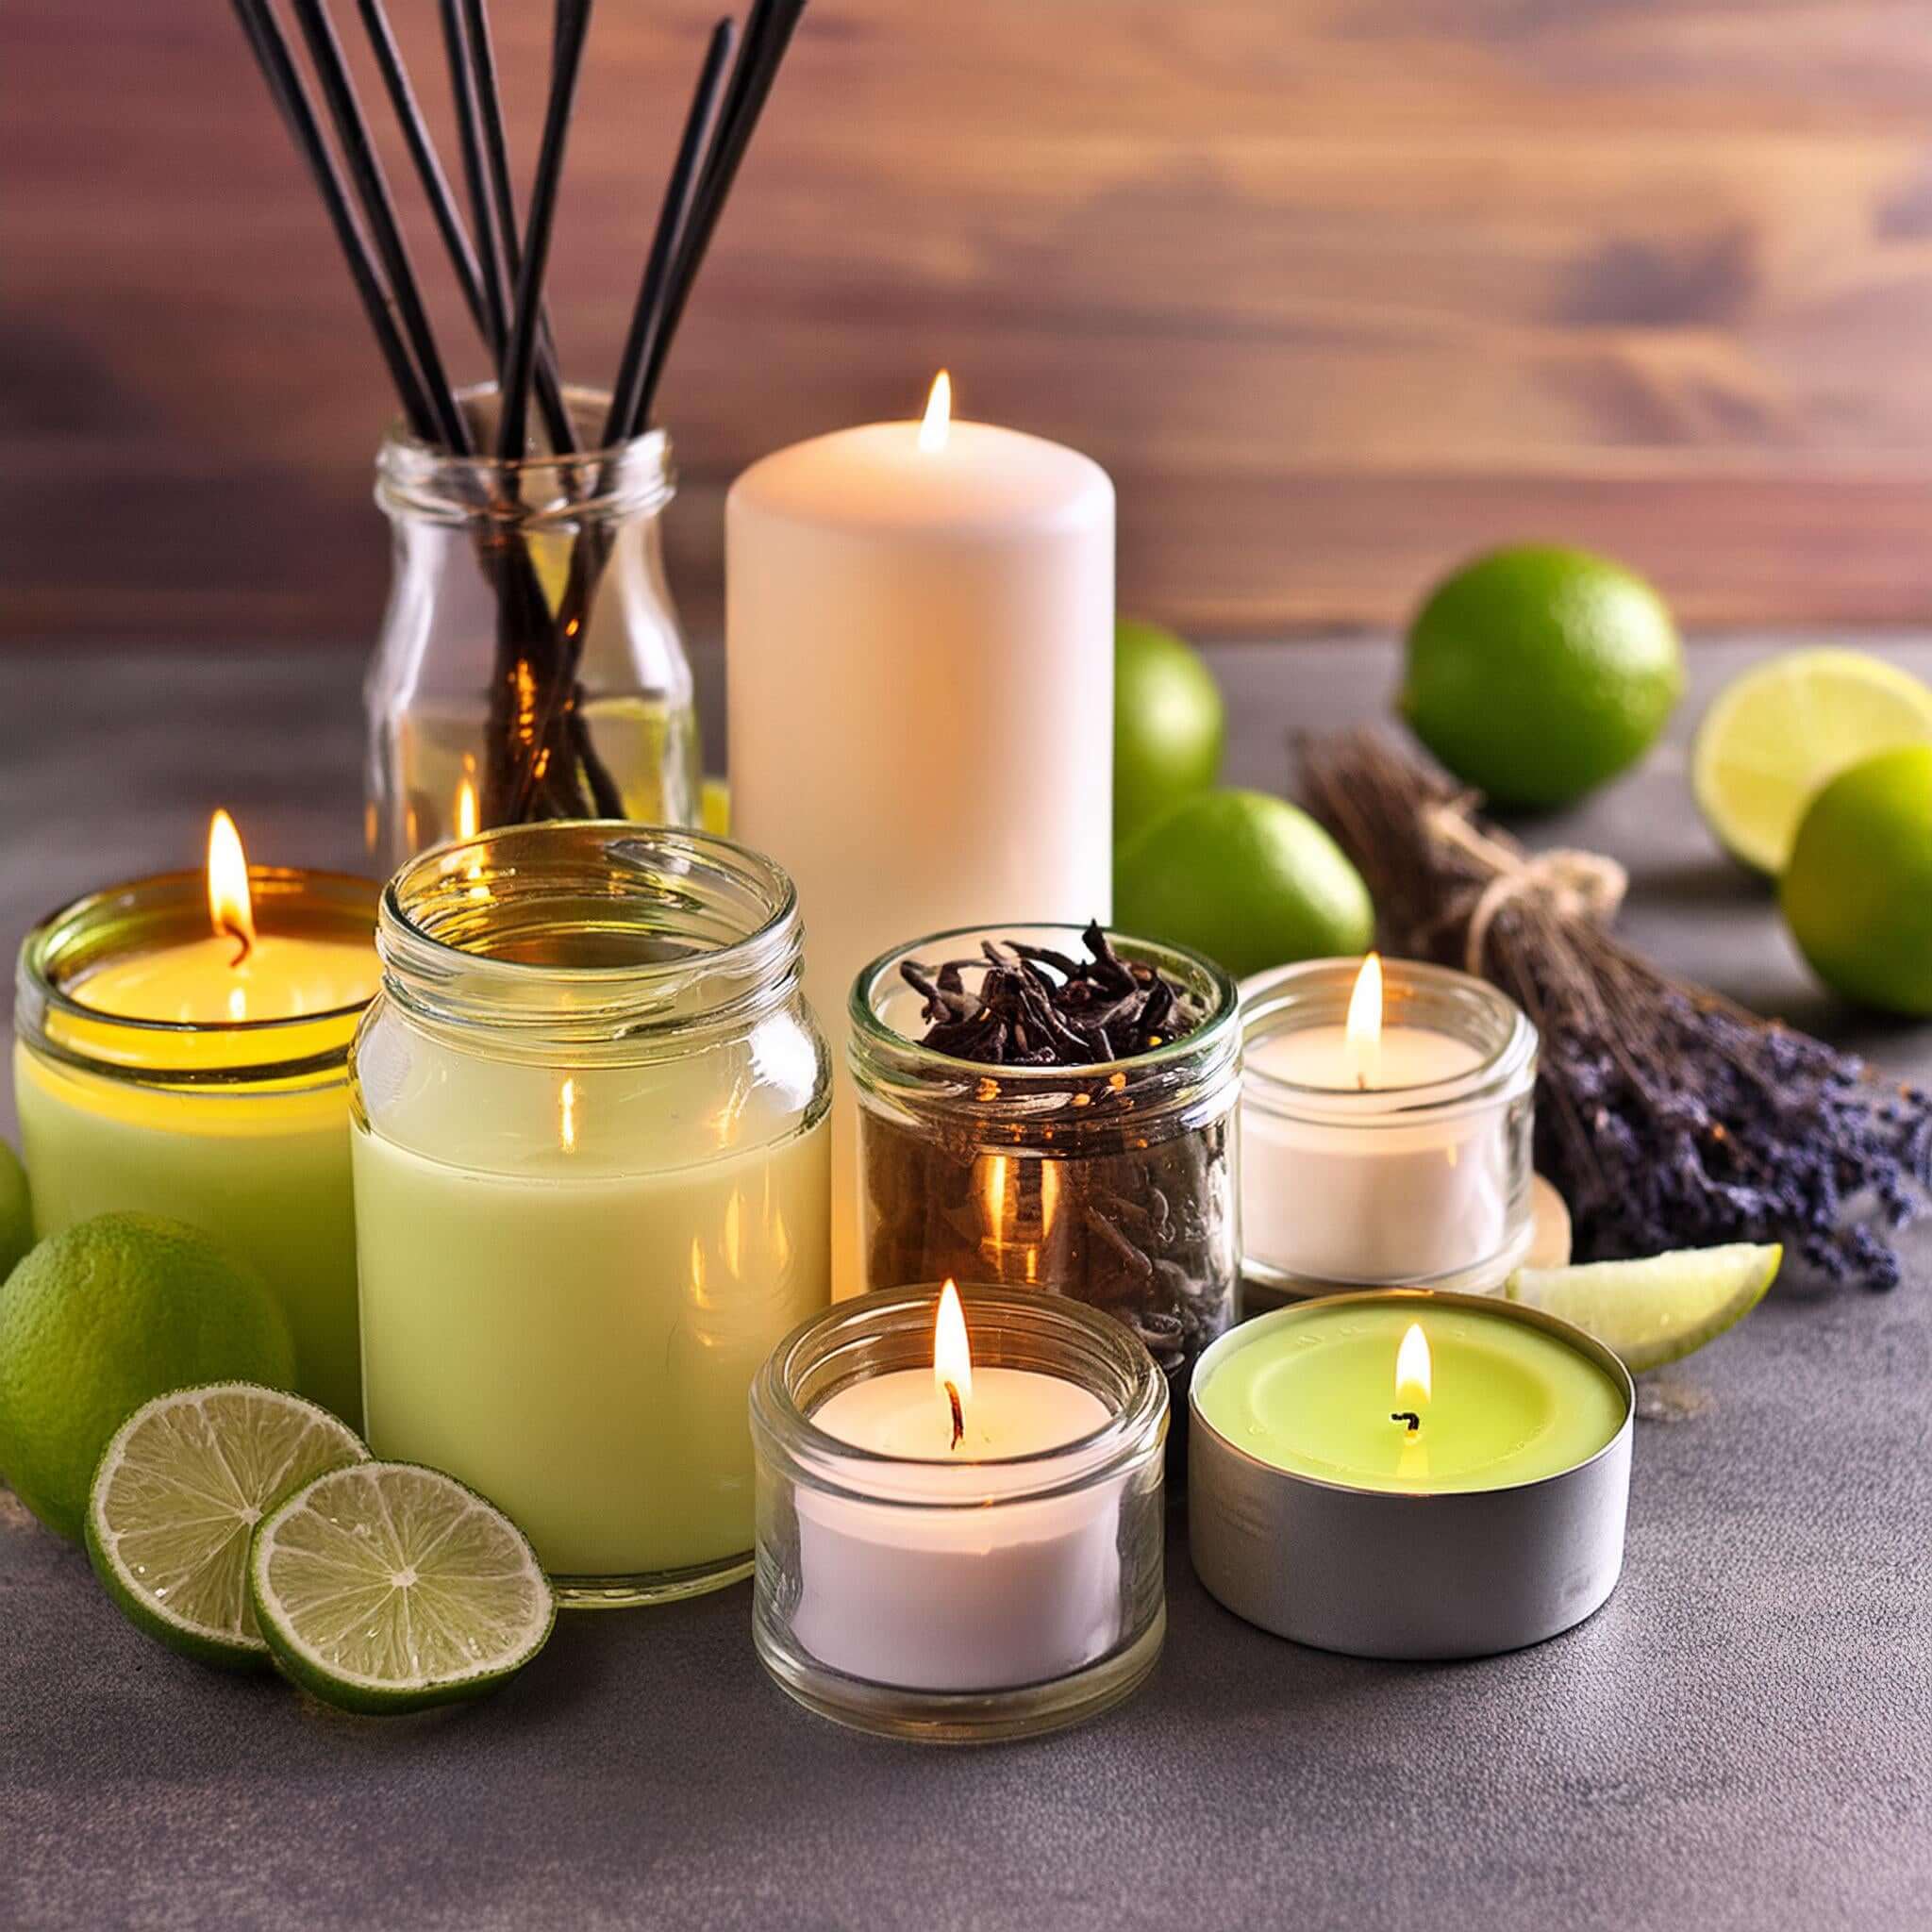 Candle Magic: The Surprising Psychological Power of Scents.